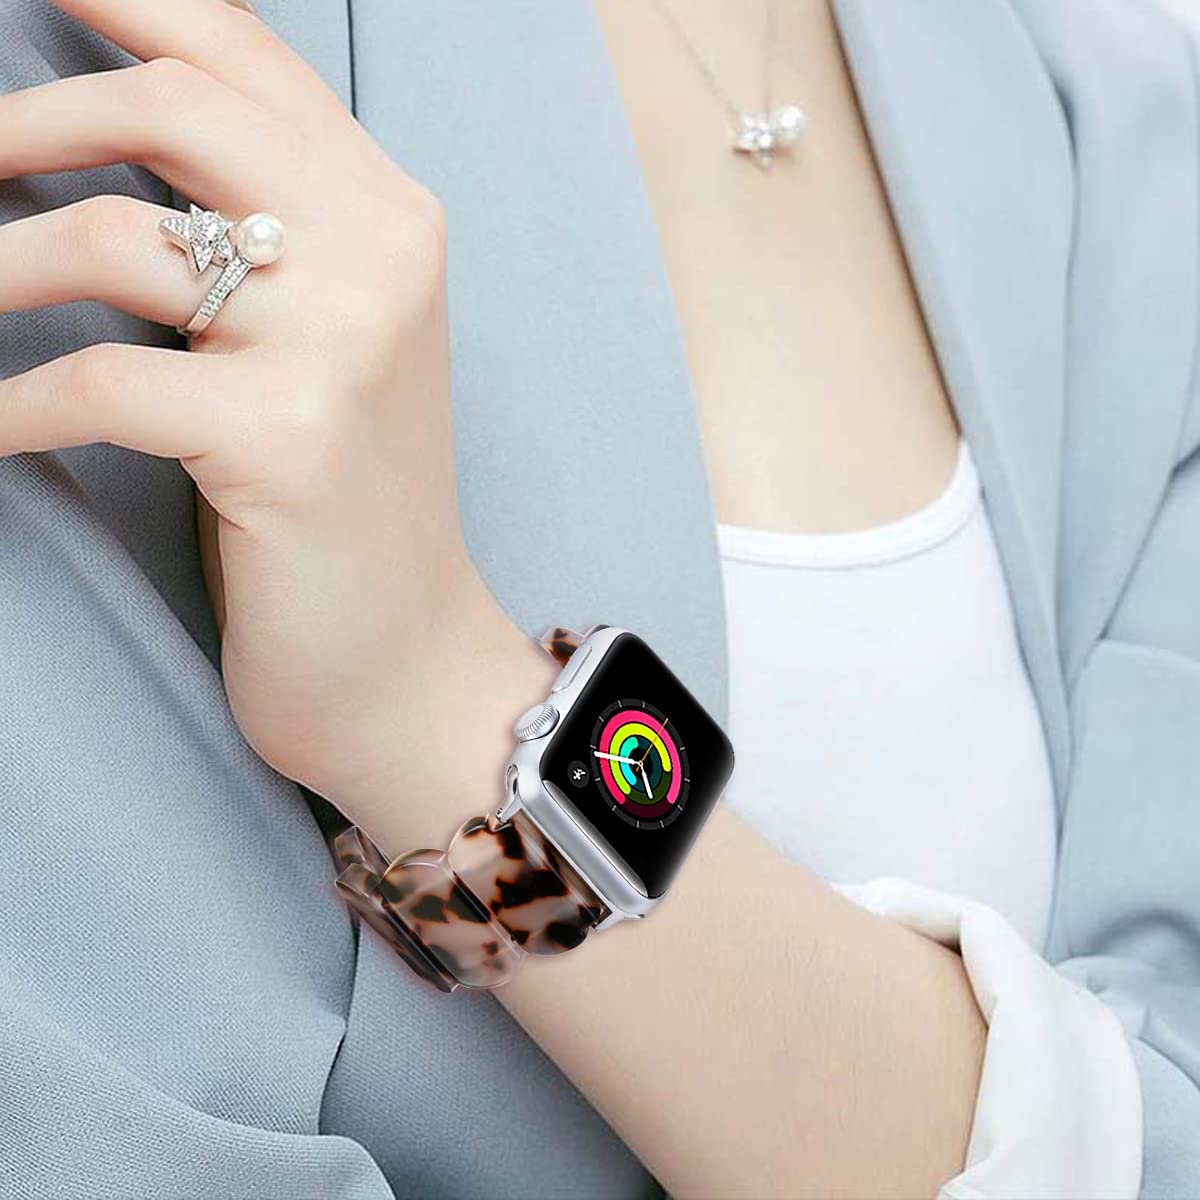 Resin Strap For Apple Watch Band/Strap